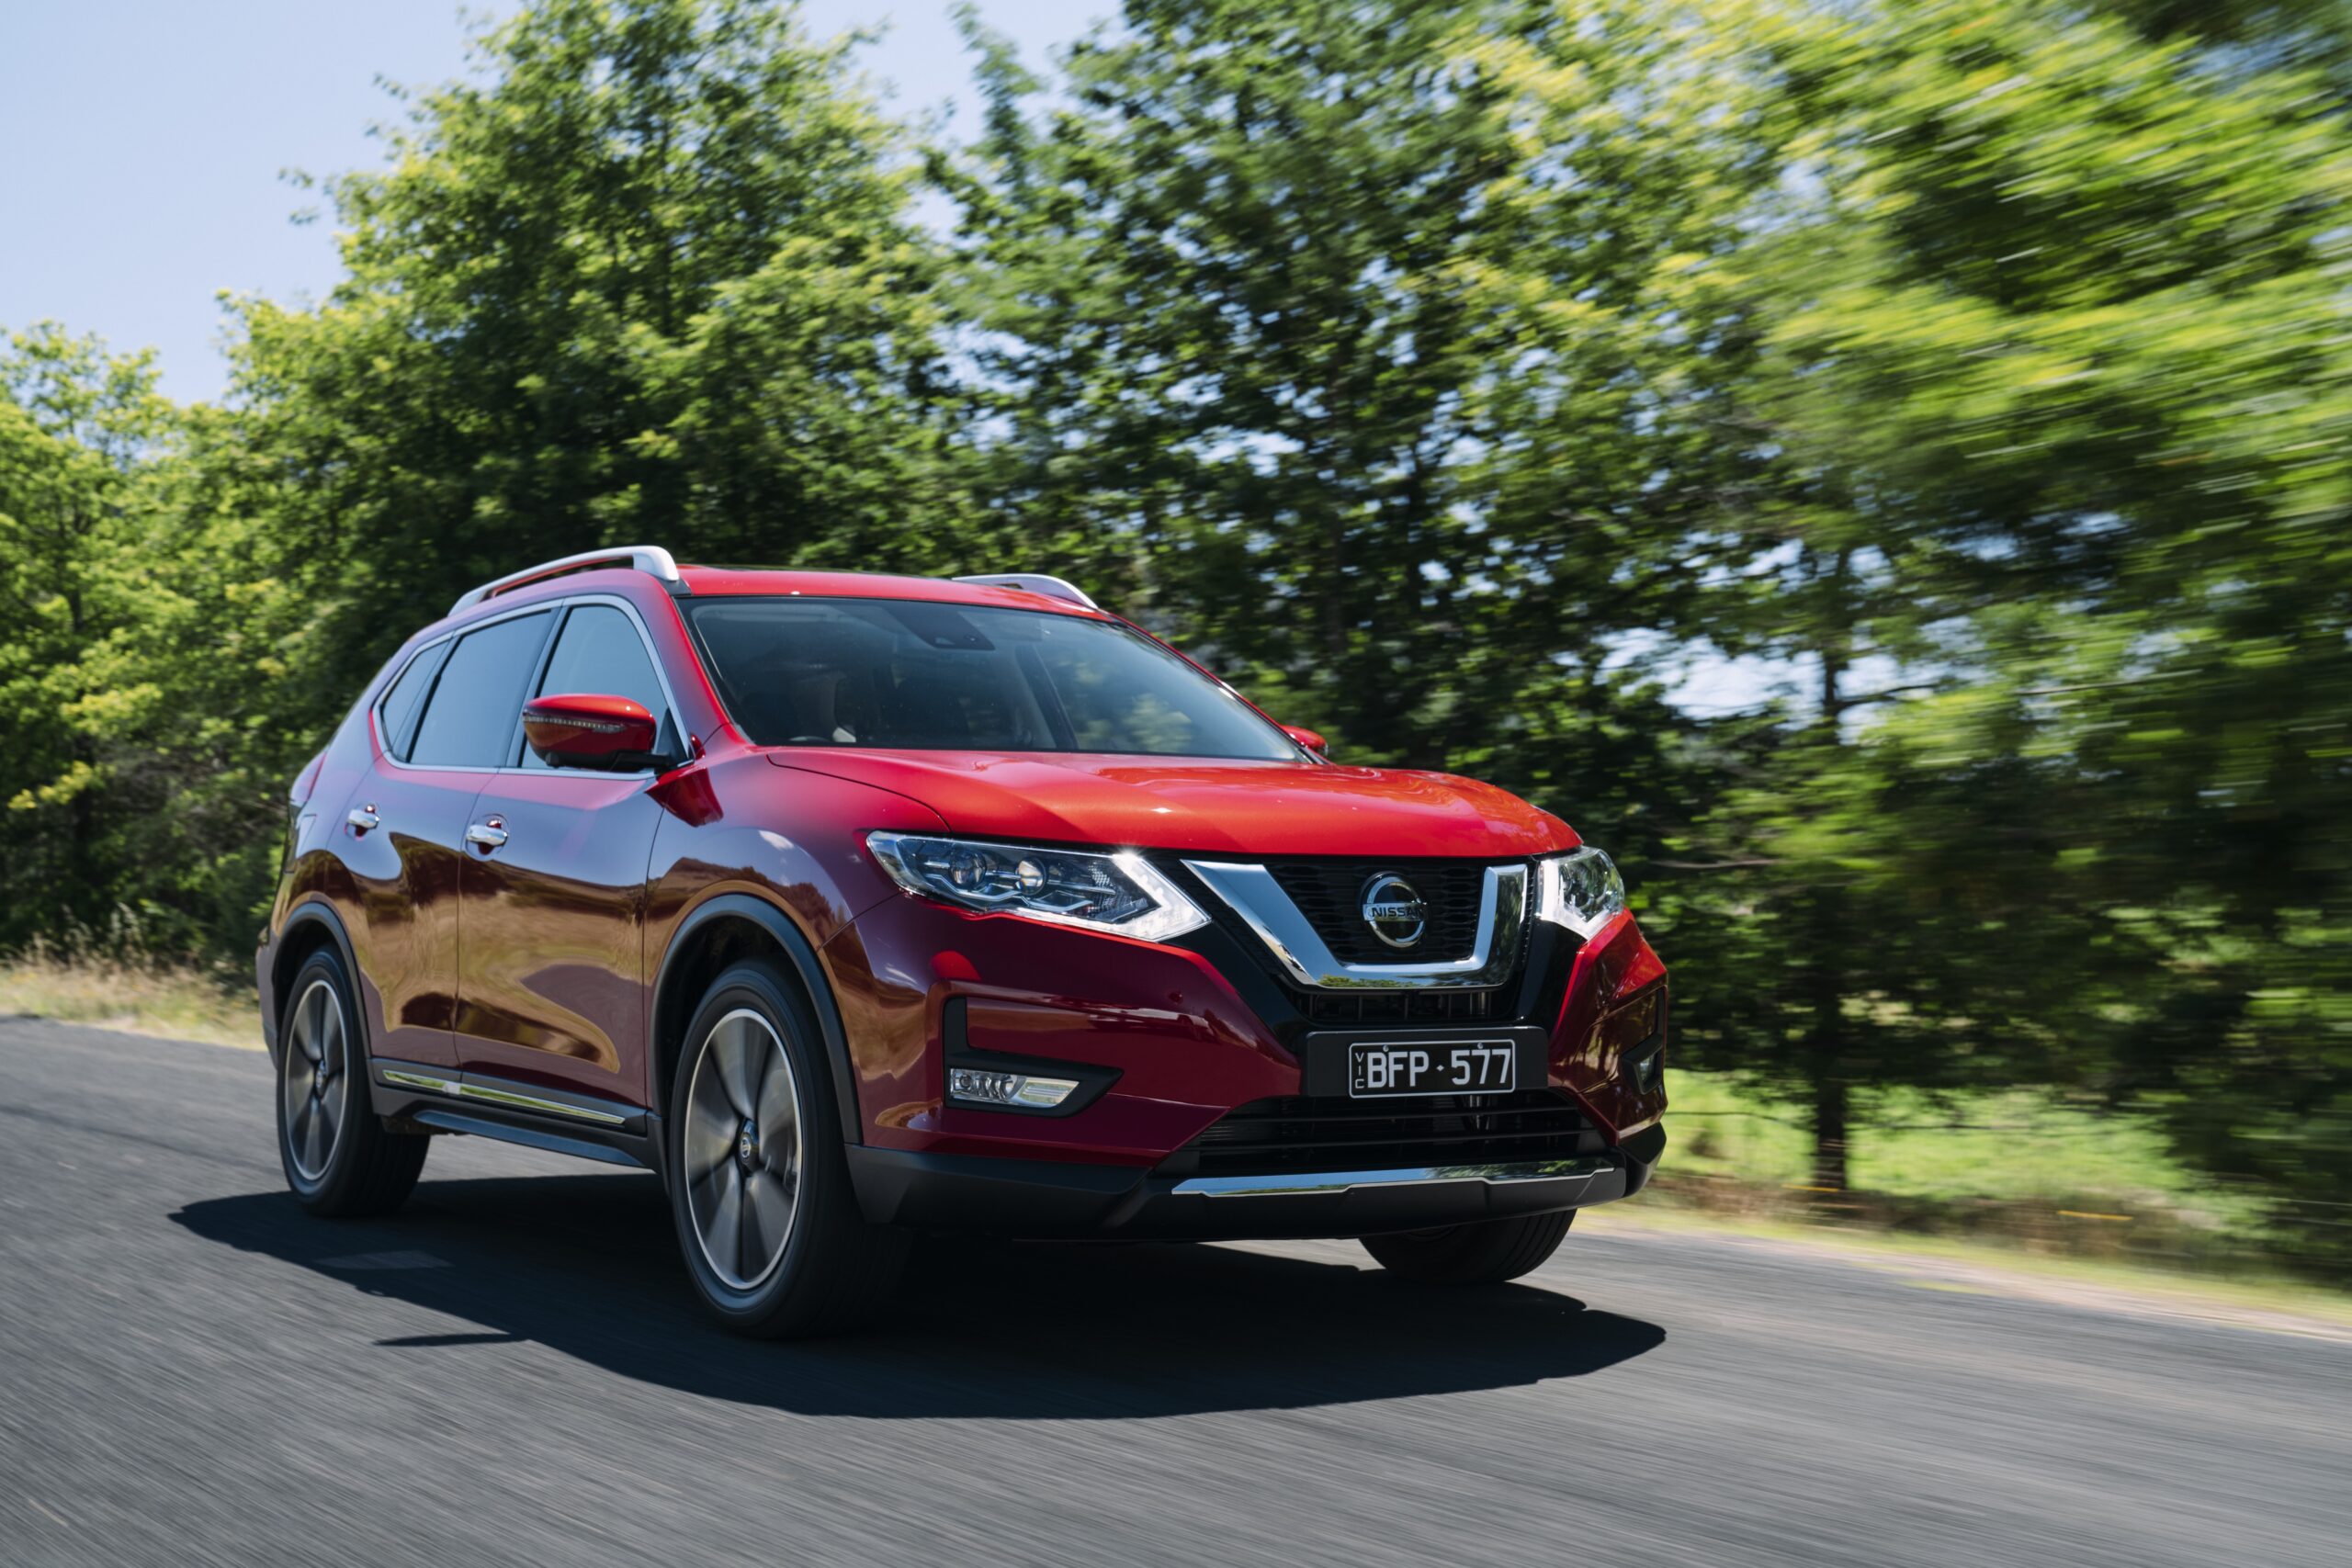 New tech, equipment and advanced safety systems for the 2021 Nissan X-TRAIL